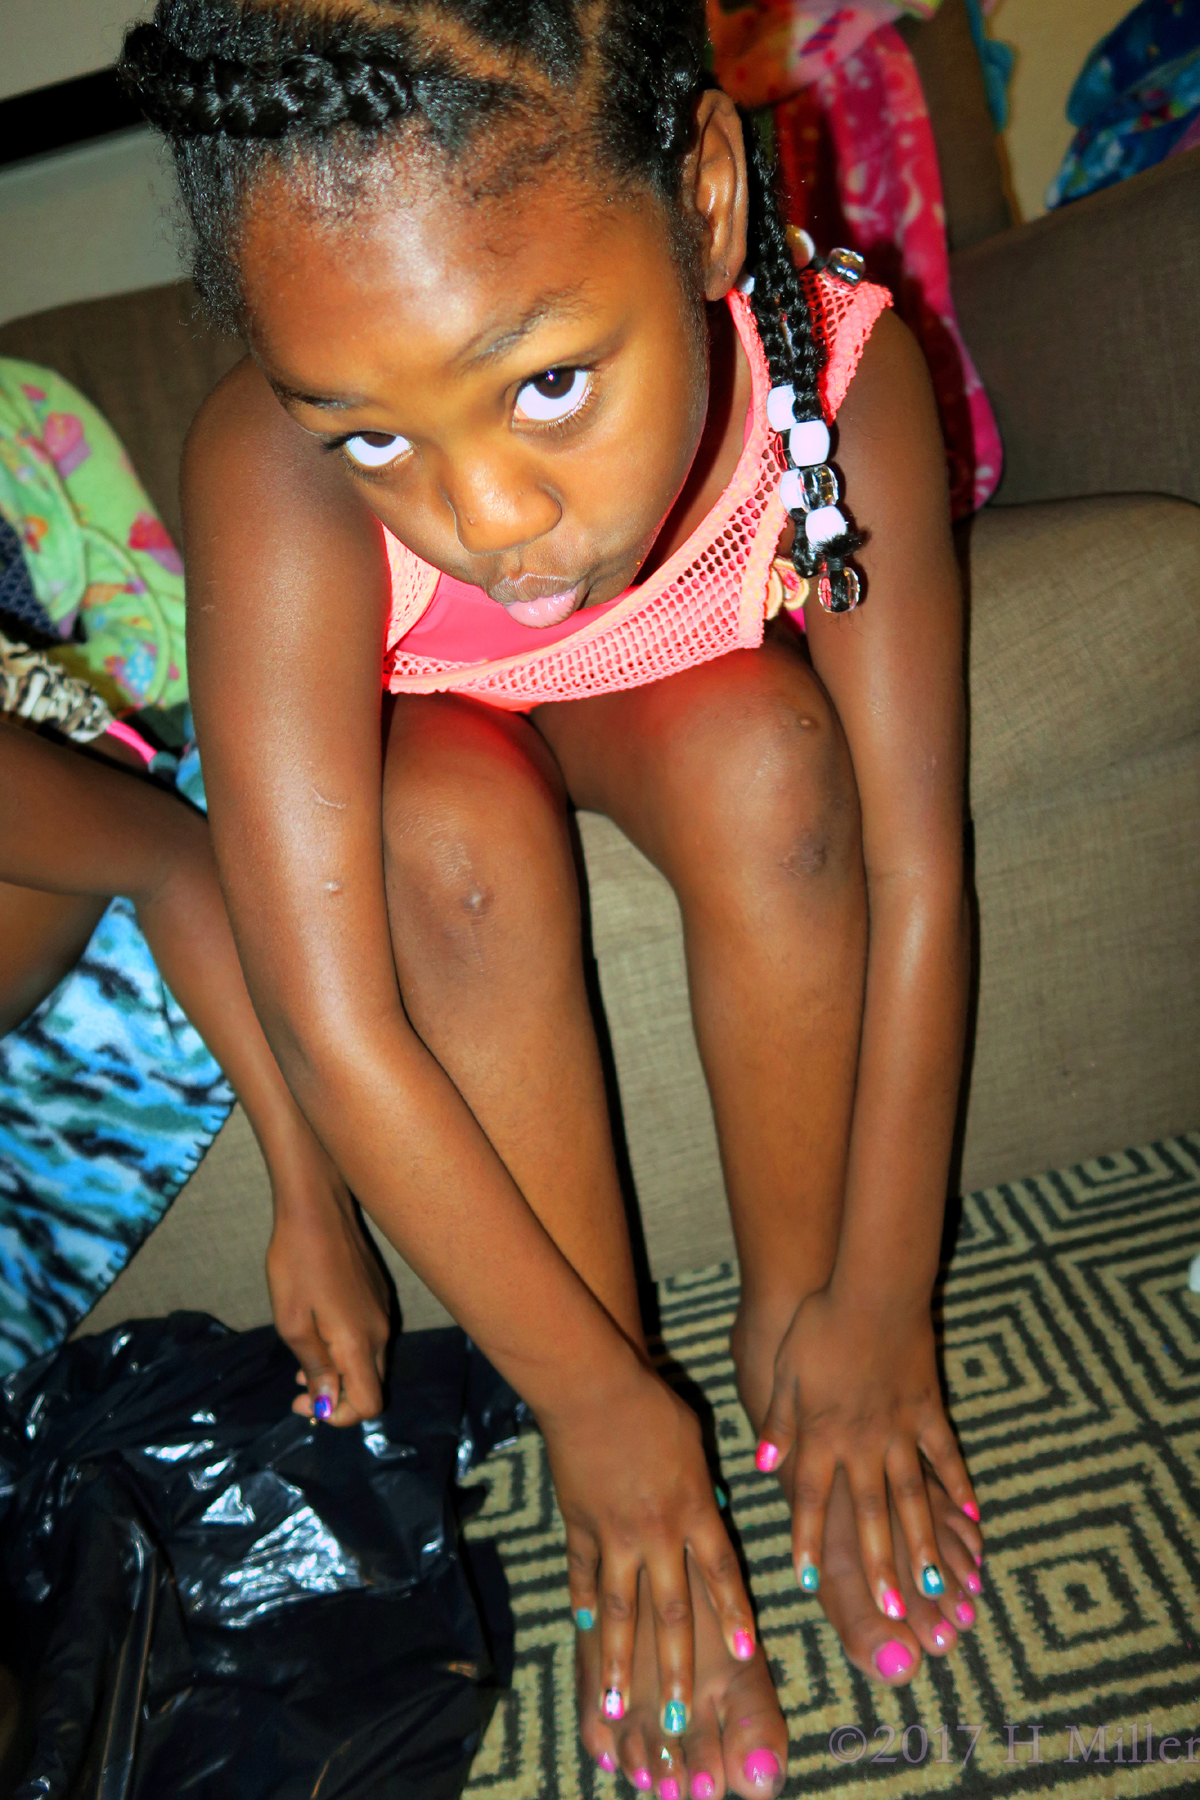 With A Cool Pose, She Shows Her Pretty Manicure And Pedicure For Girls. 